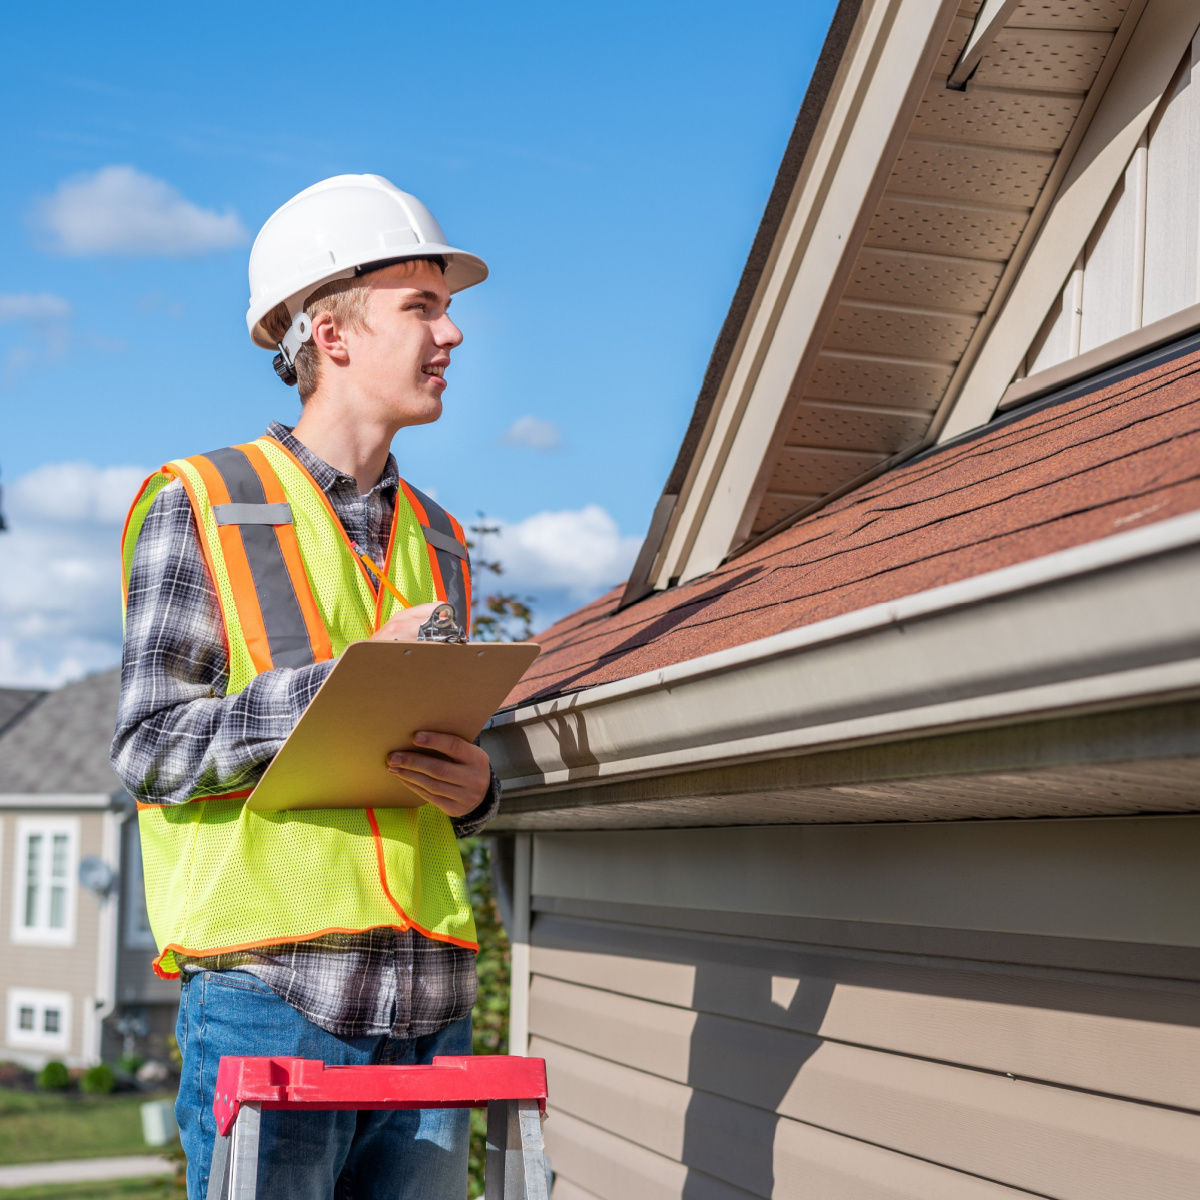 Should You Get a Roof Replacement This Fall? Start With an Inspection